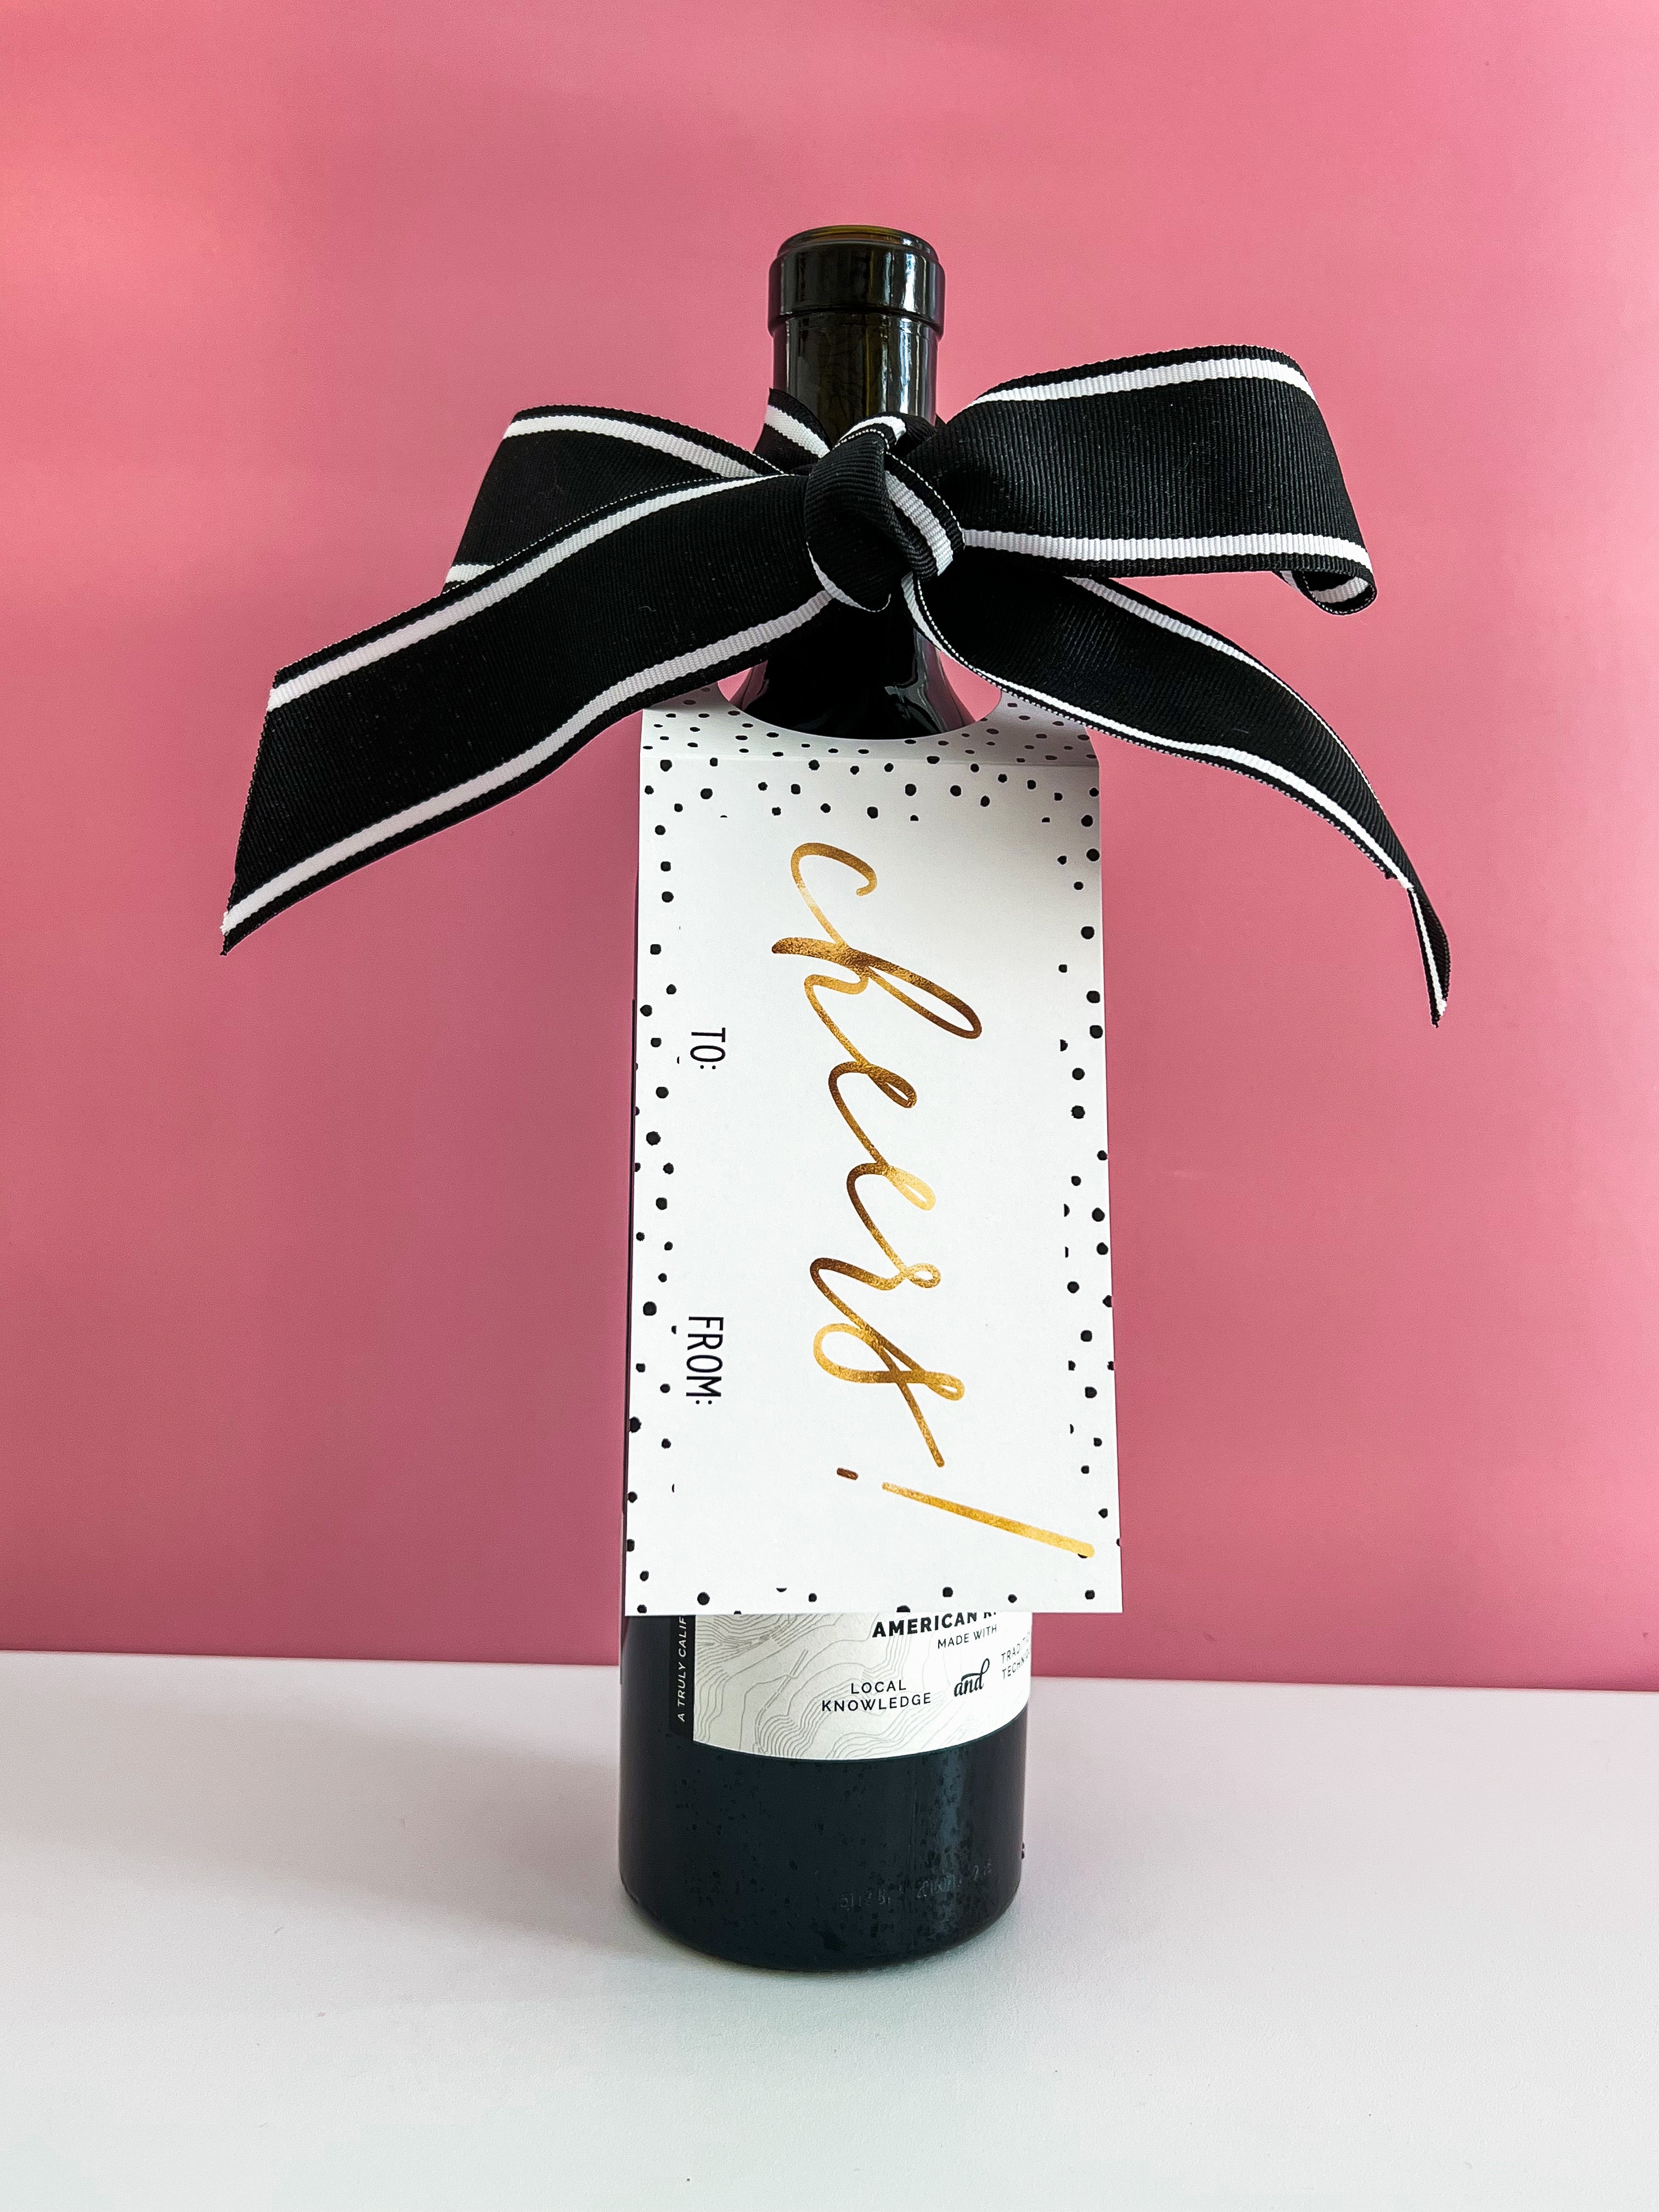 Black & White Gift Wine Tags